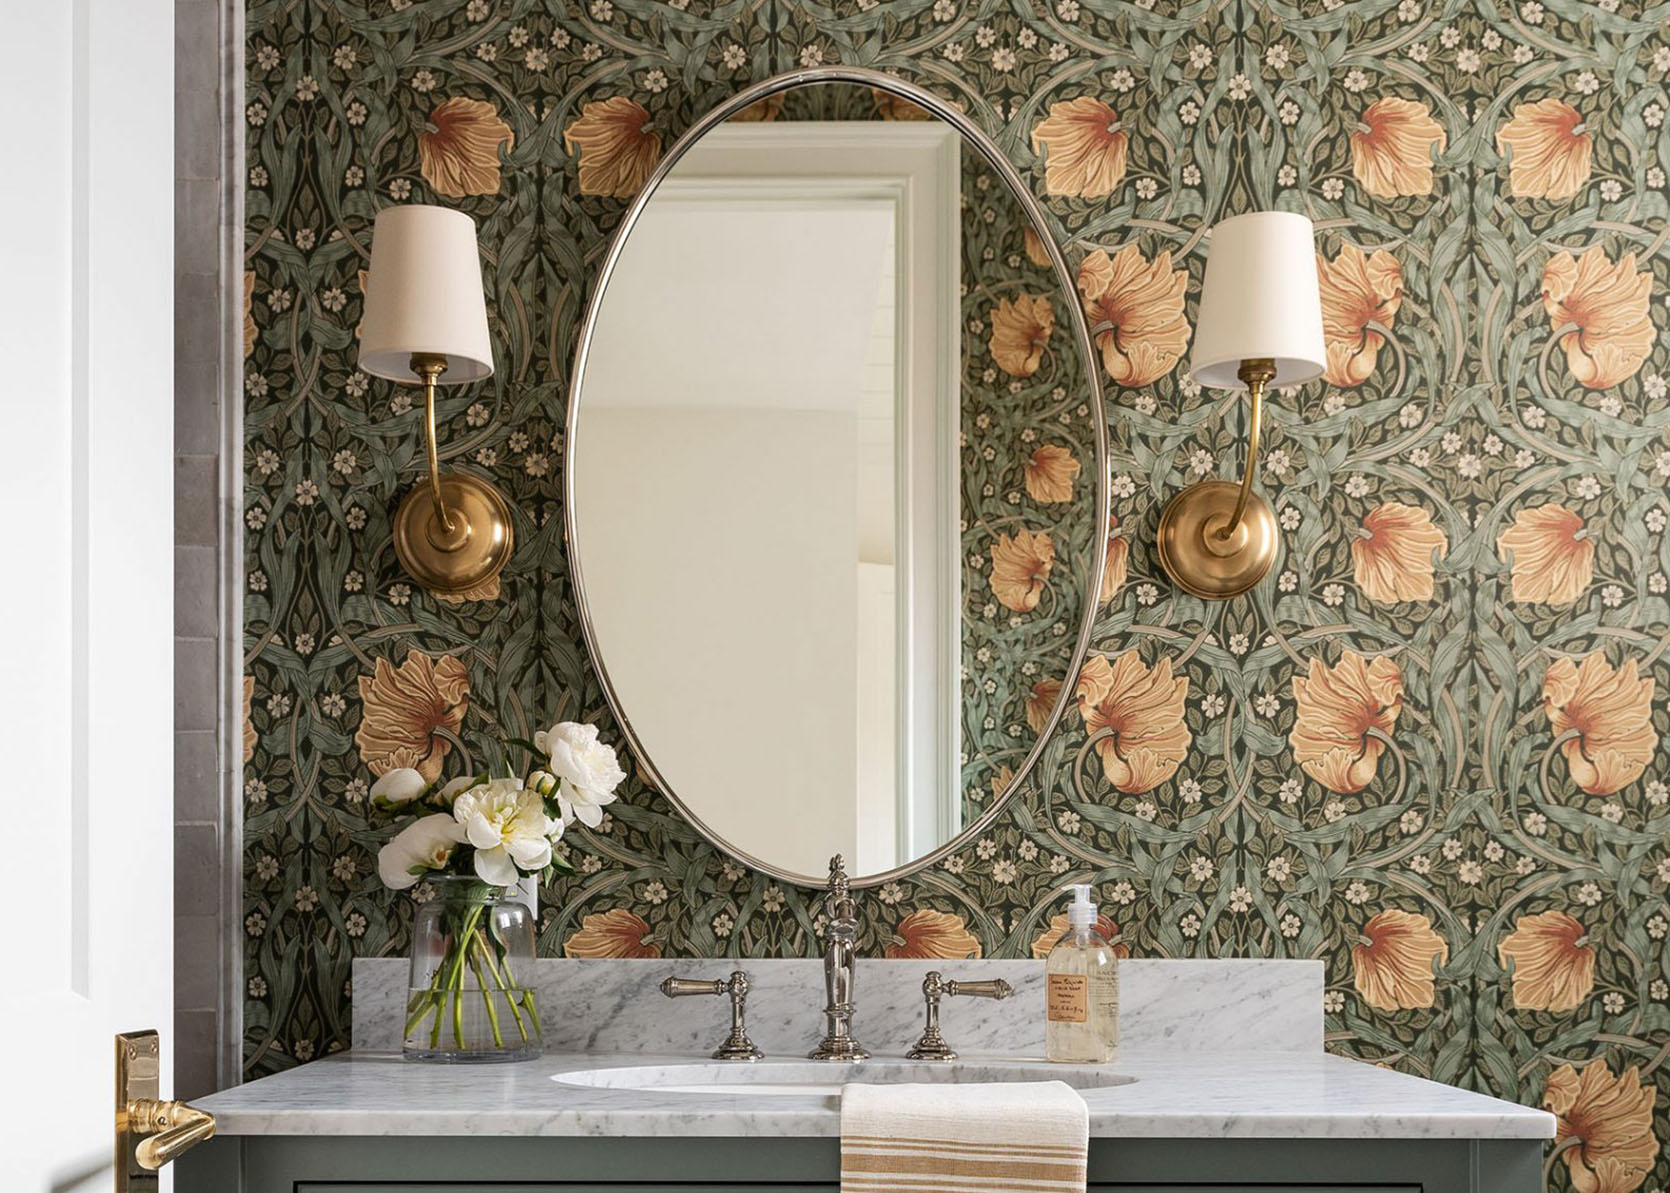 Bold Floral Wallpaper for a Cottagecore aesthetic - News from Laguna Design Center